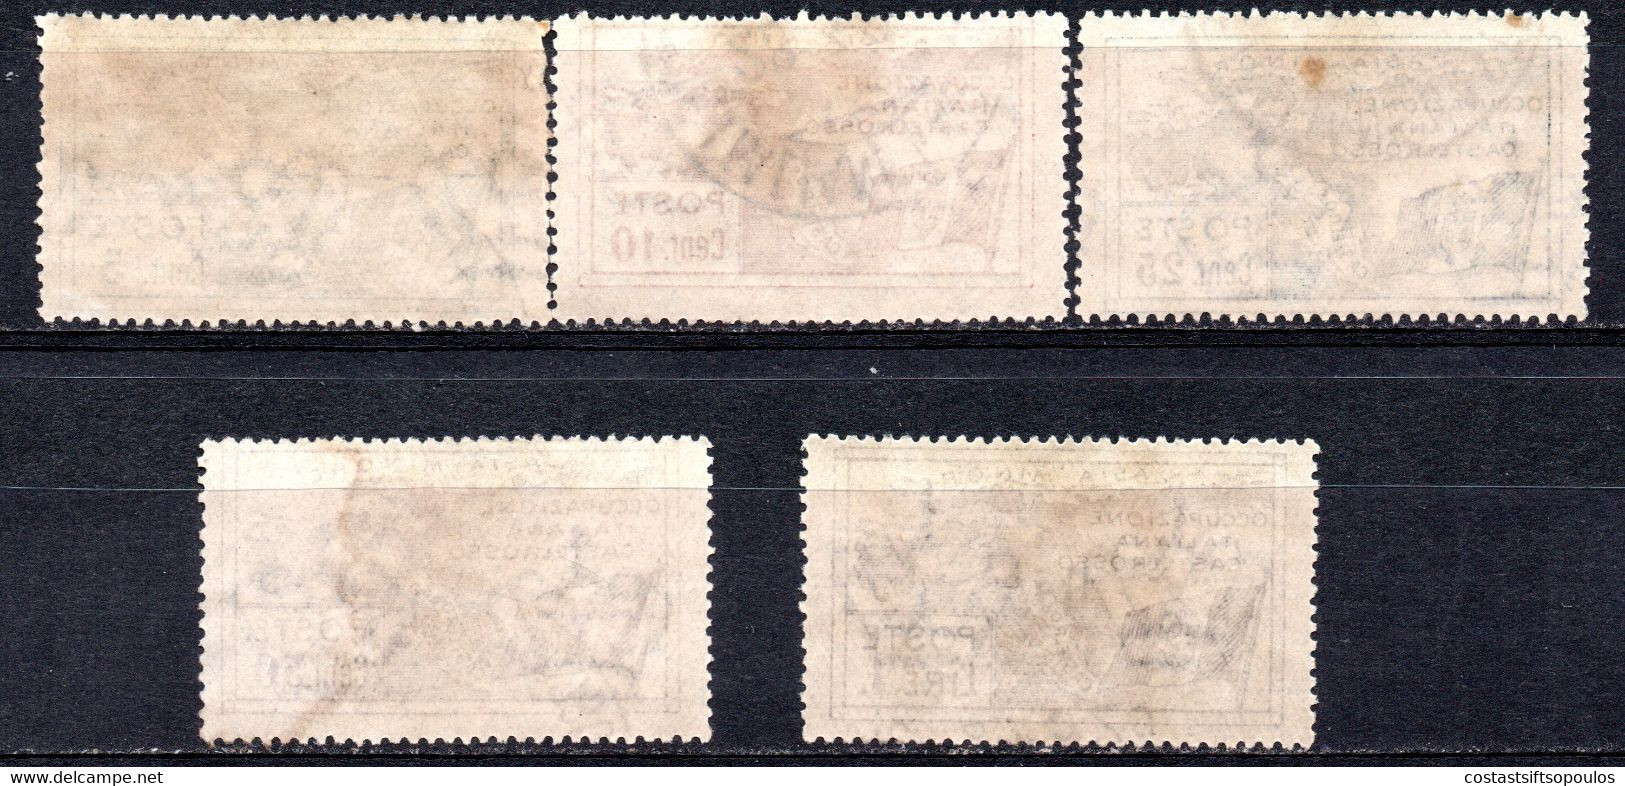 1441.GREECE,ITALY, DODECANESE.KASTELLORIZO,CASTELROSSO. 1923 HELLAS 26-30.FREE SHIPPING BY REGISTERED MAIL. - Dodécanèse